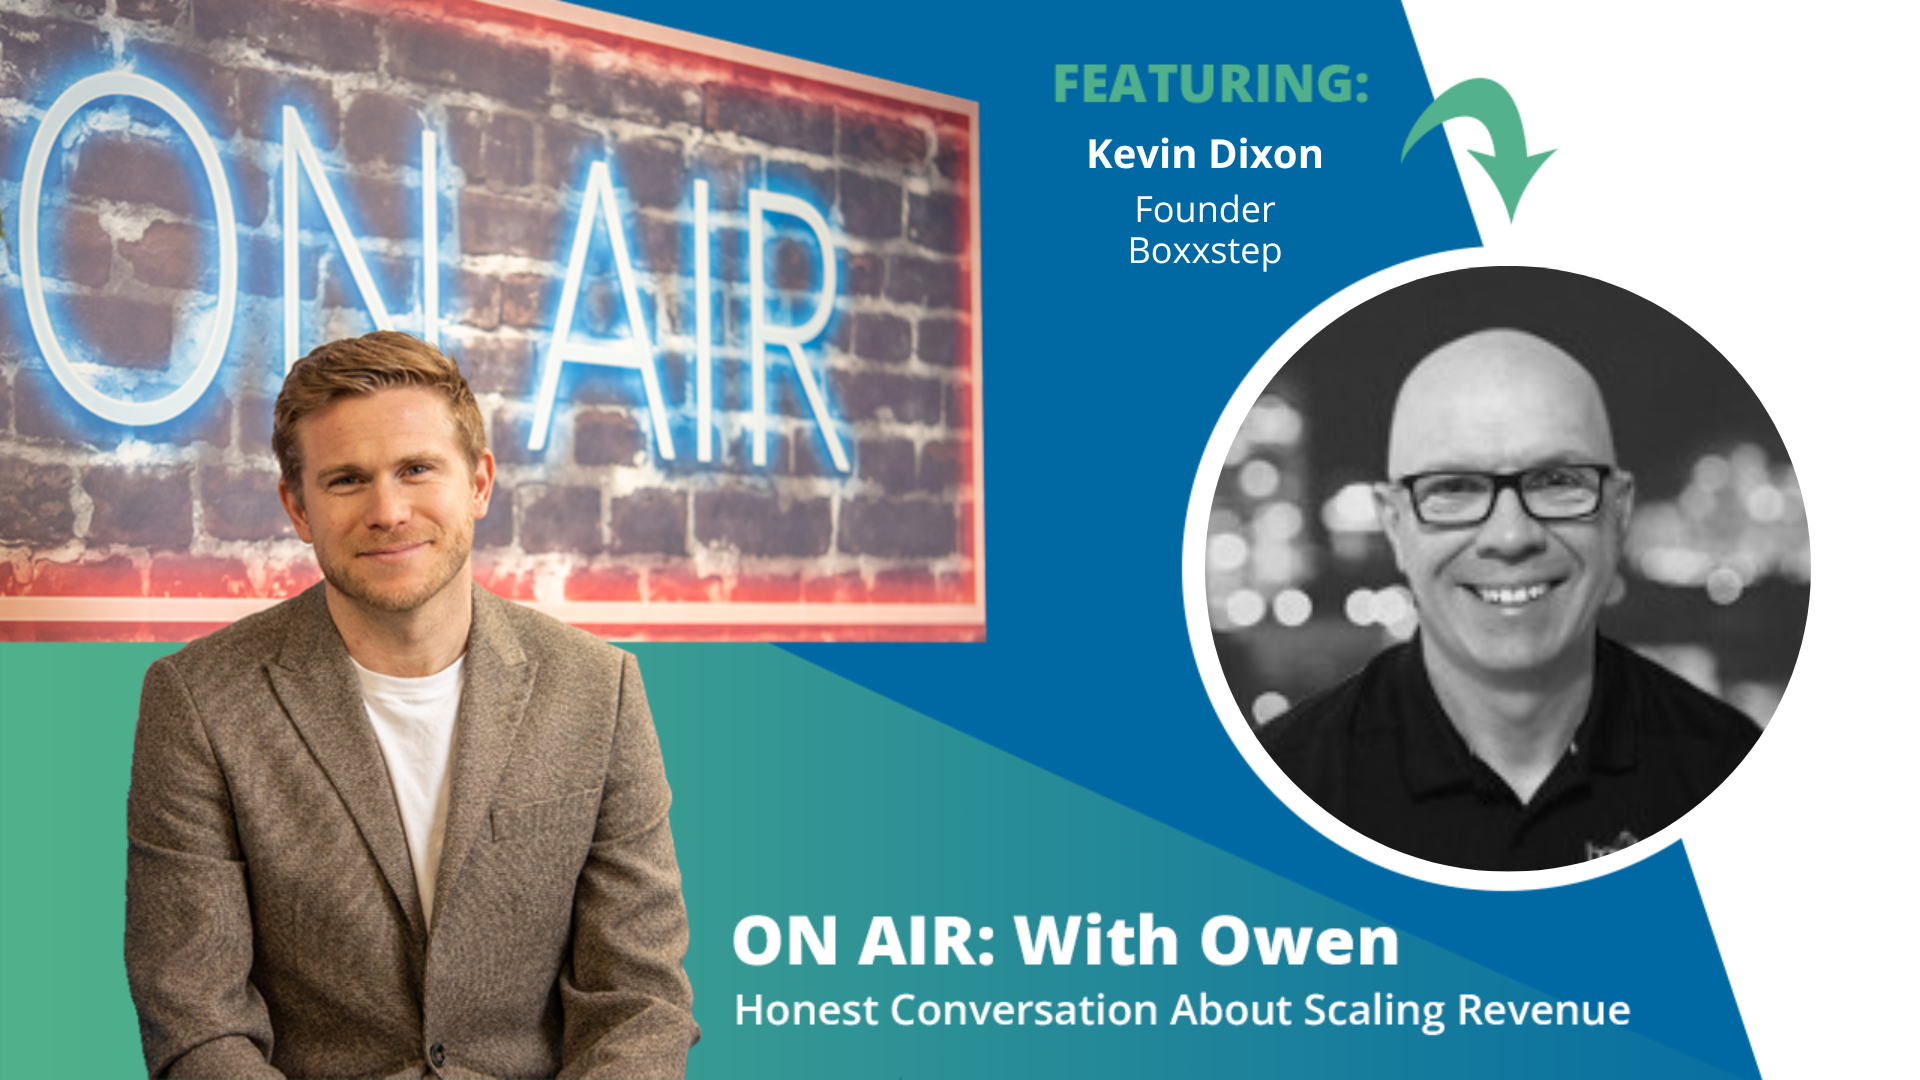 ON AIR: With Owen Episode 62 Featuring Kevin Dixon – Founder of Boxxstep